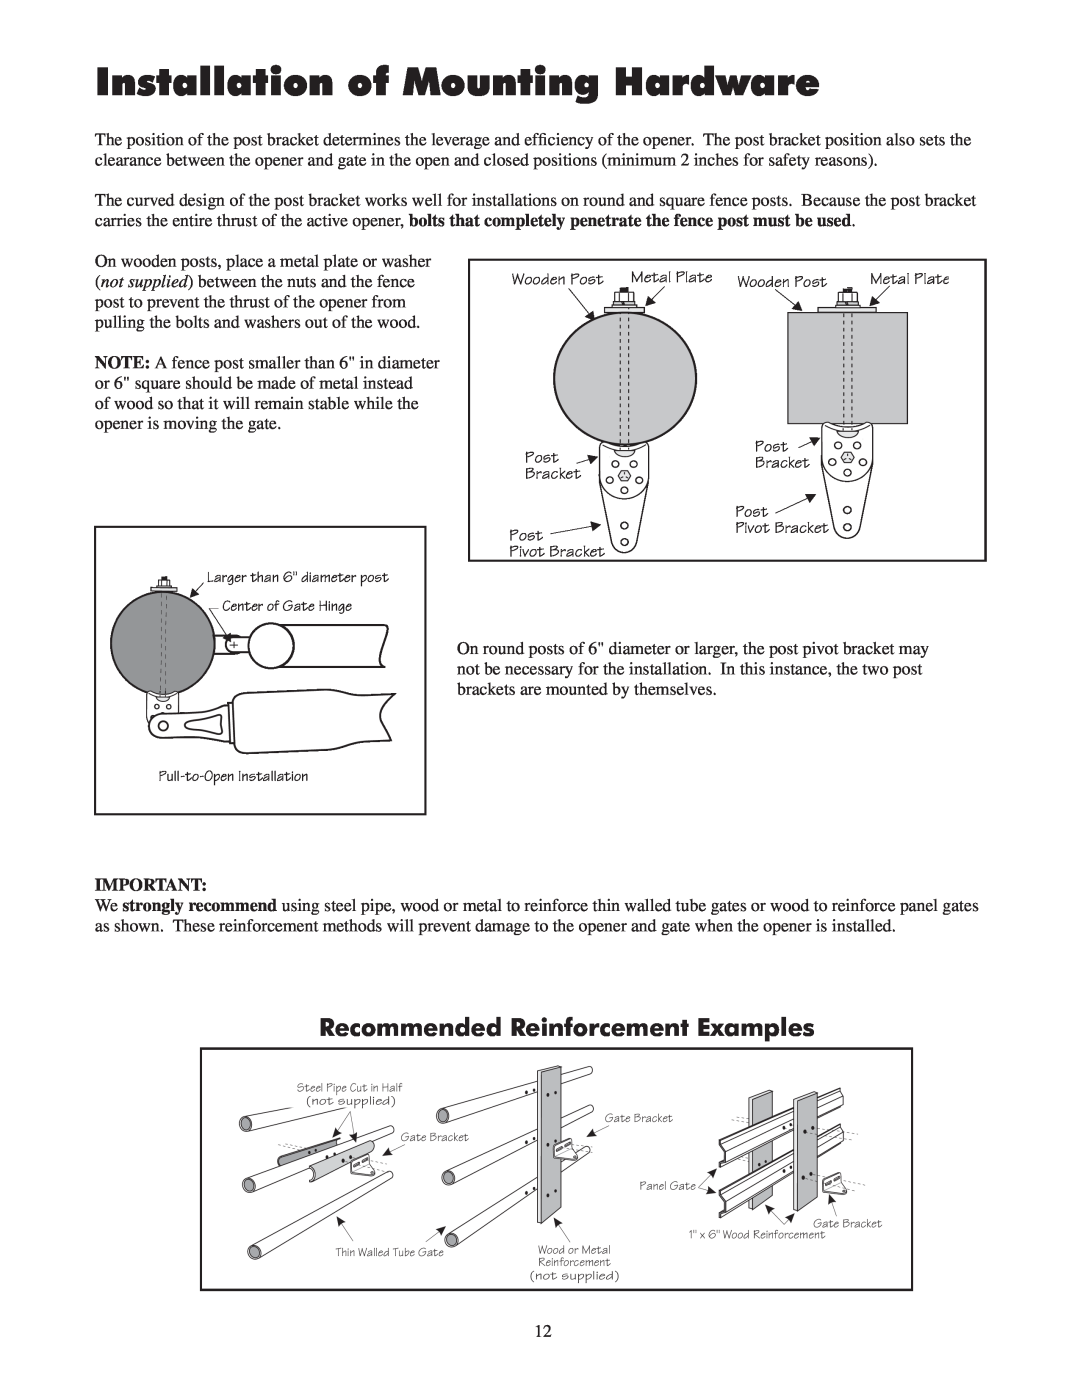 GTO 2550, 2502 installation manual Installation of Mounting Hardware, Recommended Reinforcement Examples 